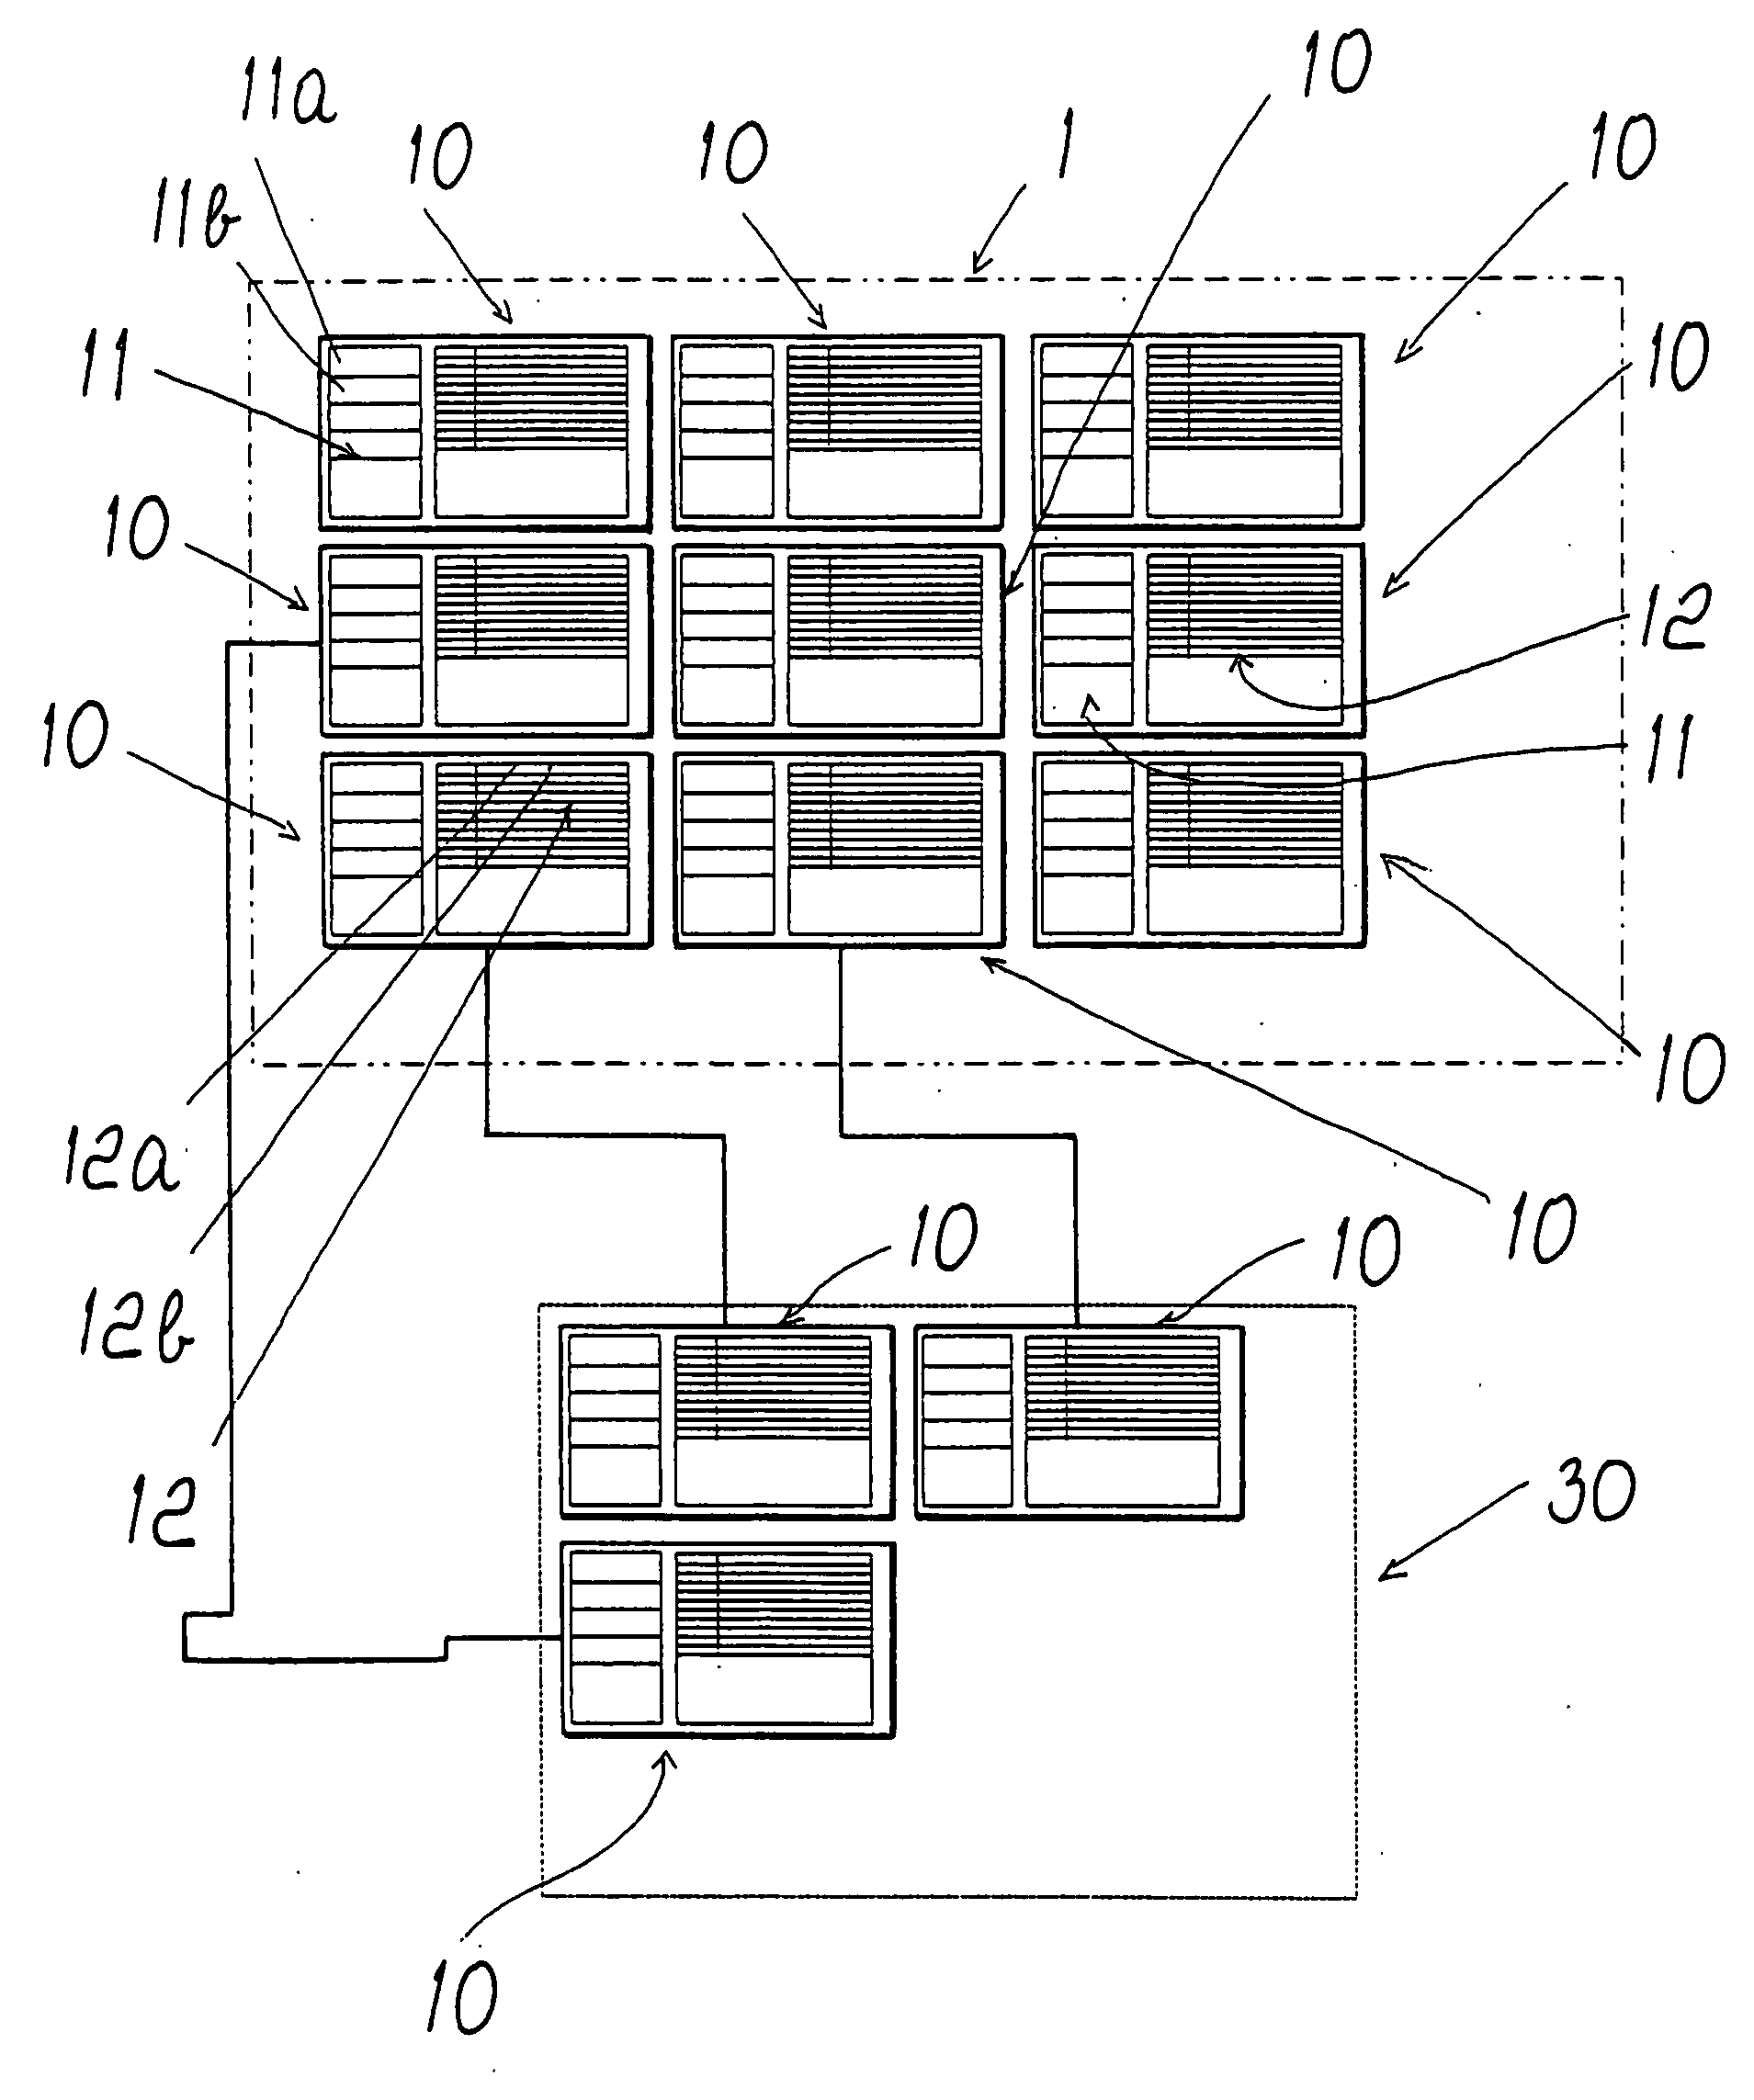 Method for Clinical Analyses of the Comparative Type